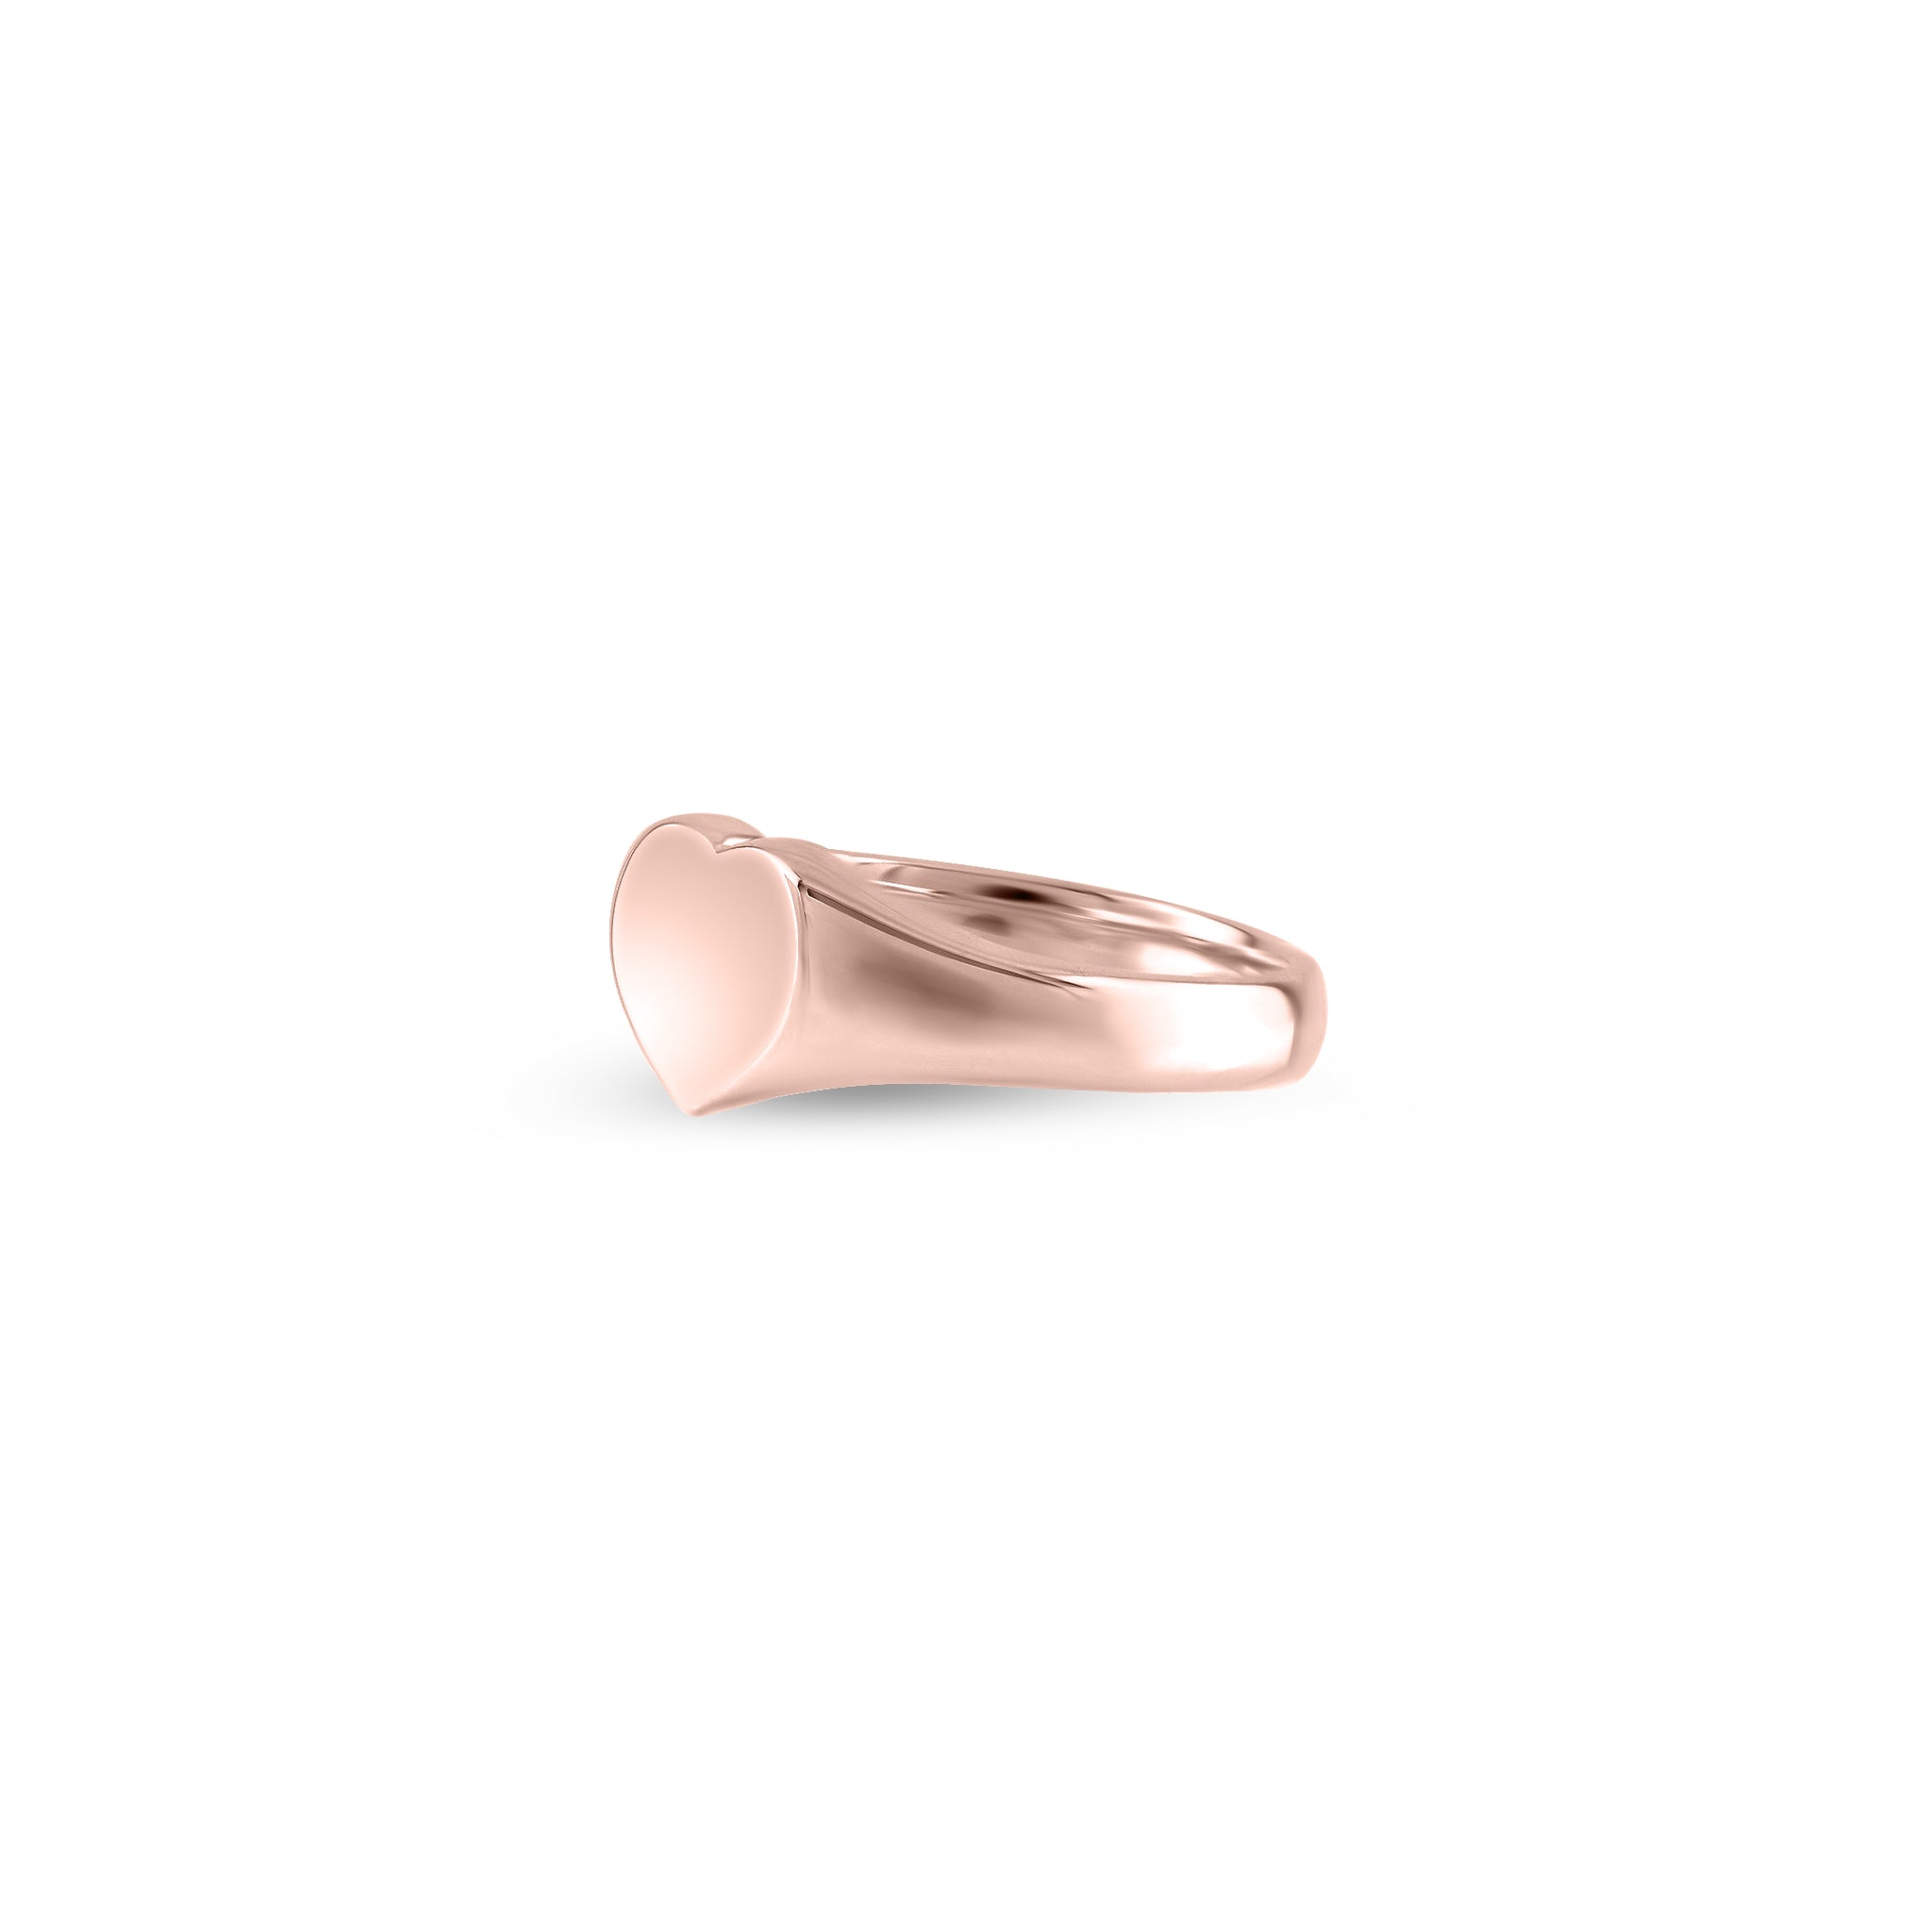 9ct Rose Gold 9 x 9mm Heart Signet Ring